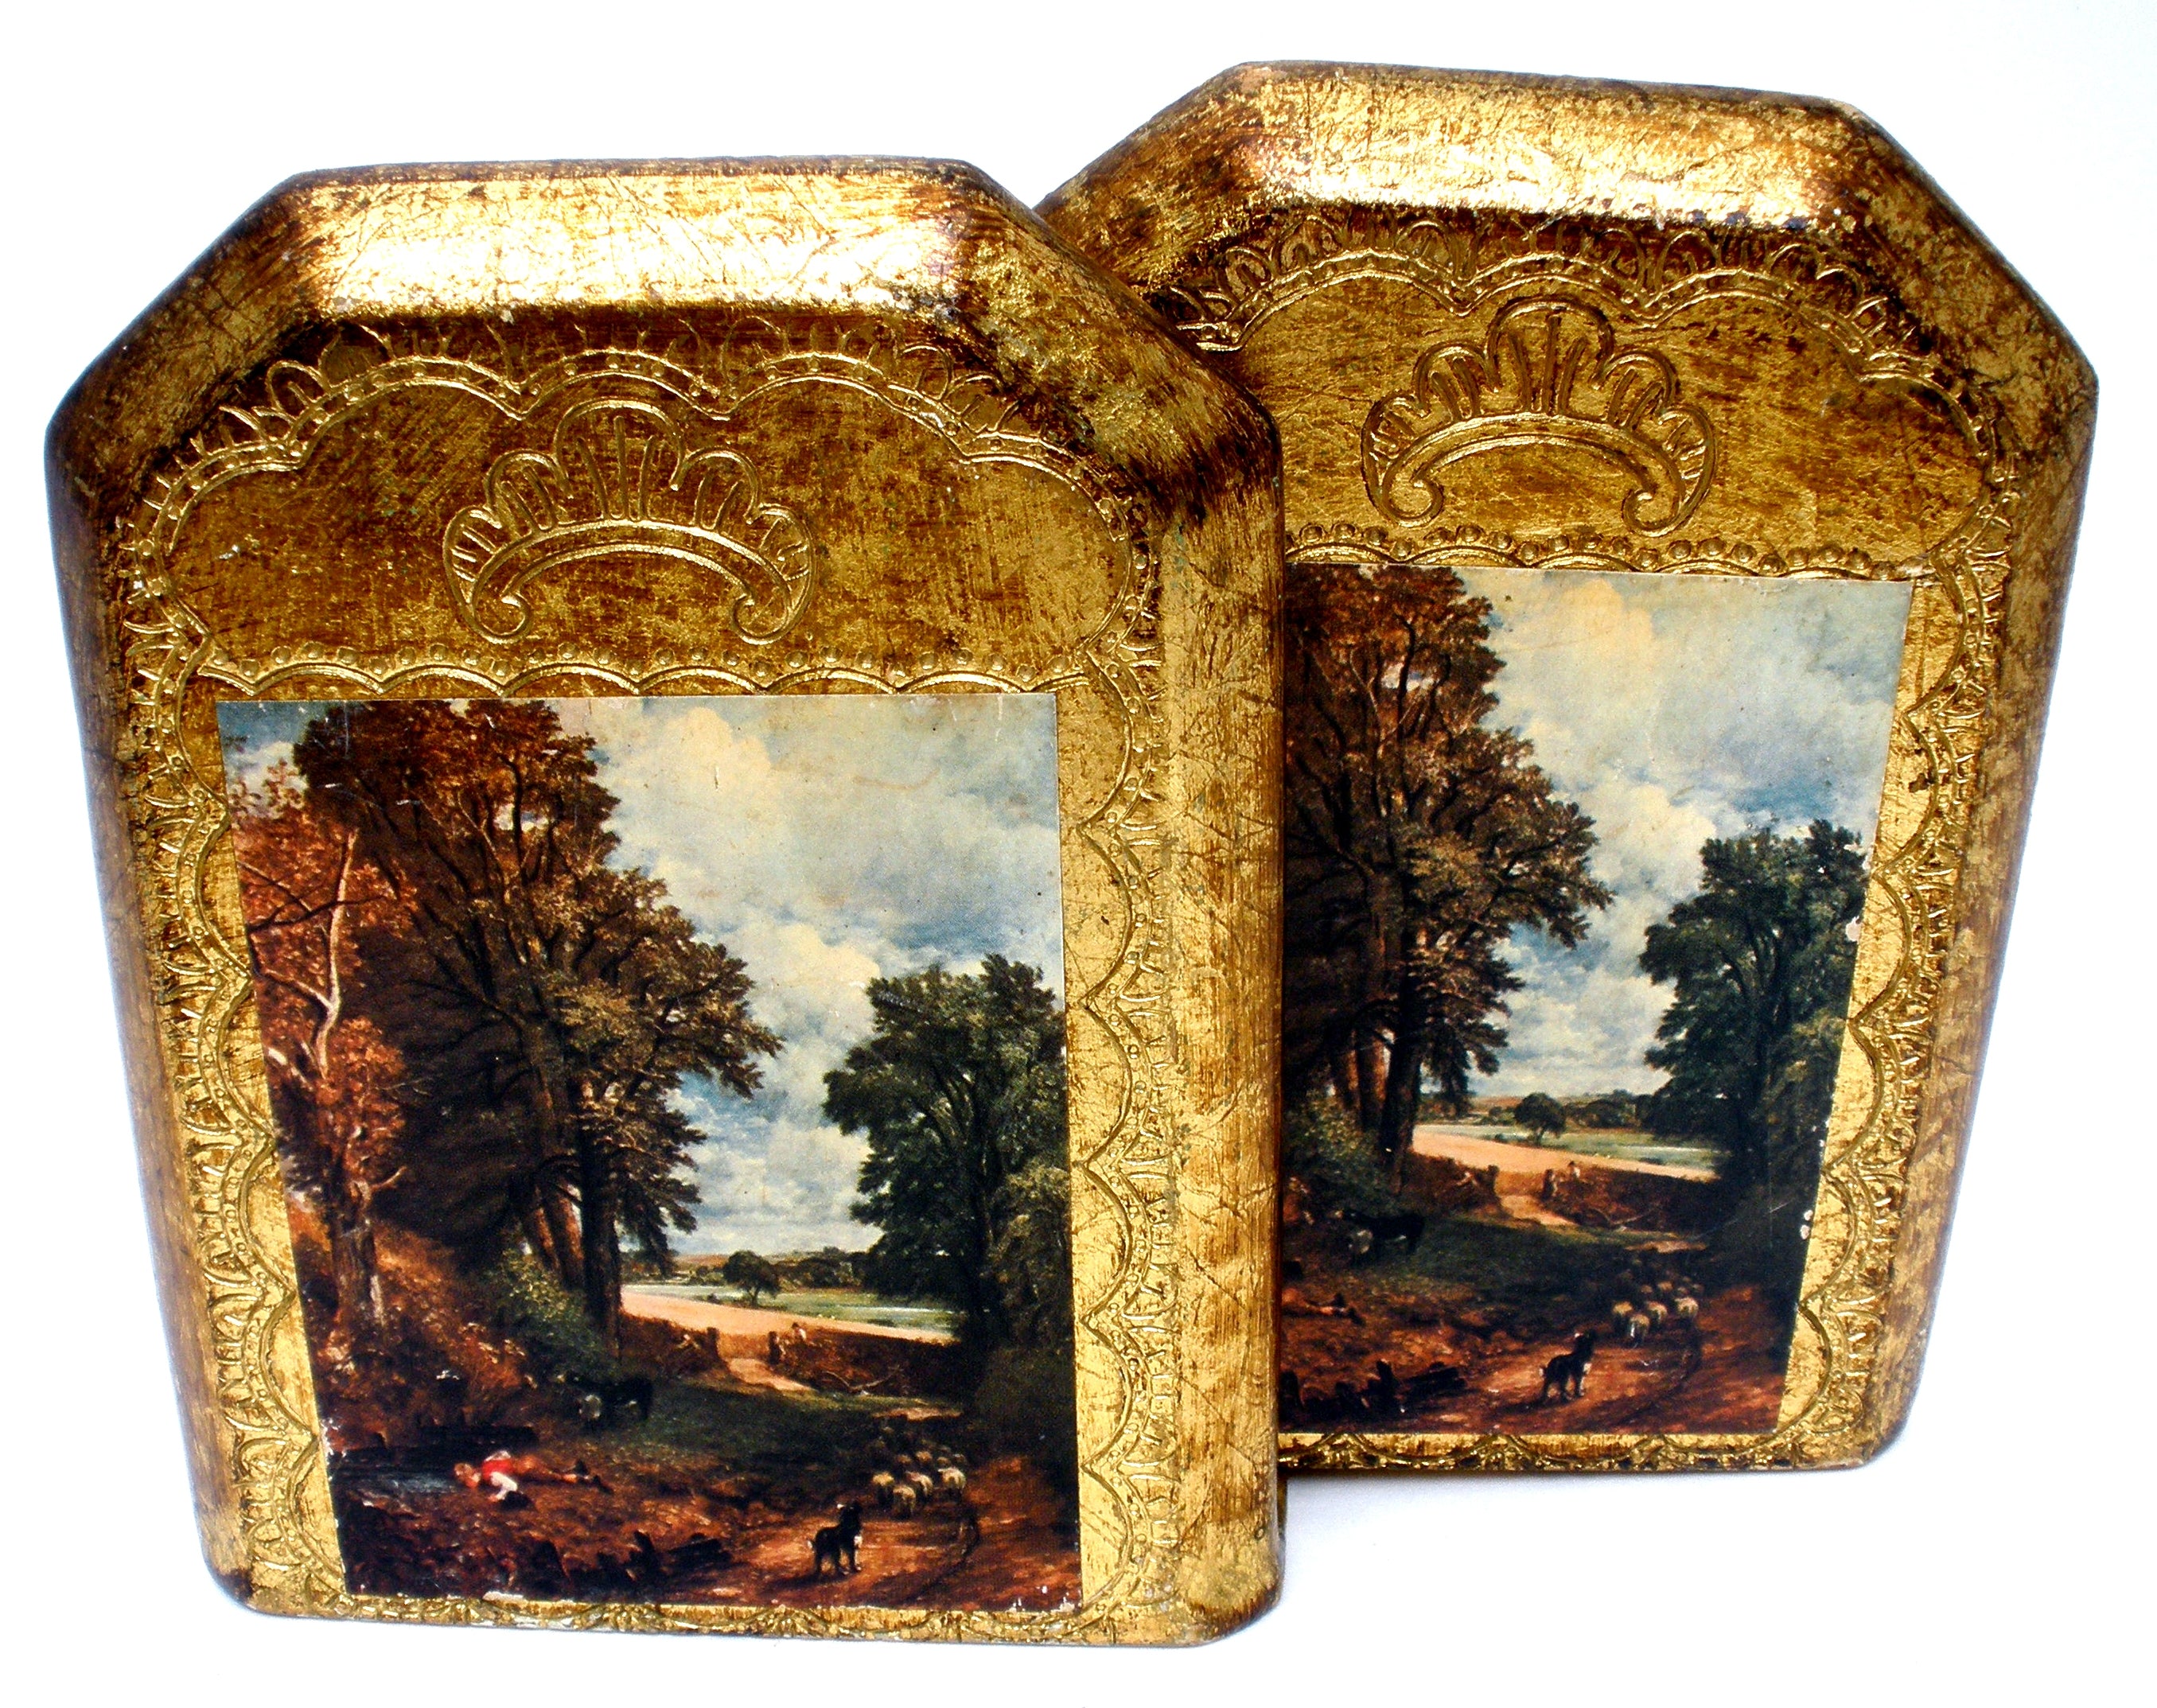 https://the-jewelry-ladys-store.myshopify.com/cdn/shop/products/Italian_Florentine_Bookends_Vintage_Toleware_8.JPG?v=1535101364